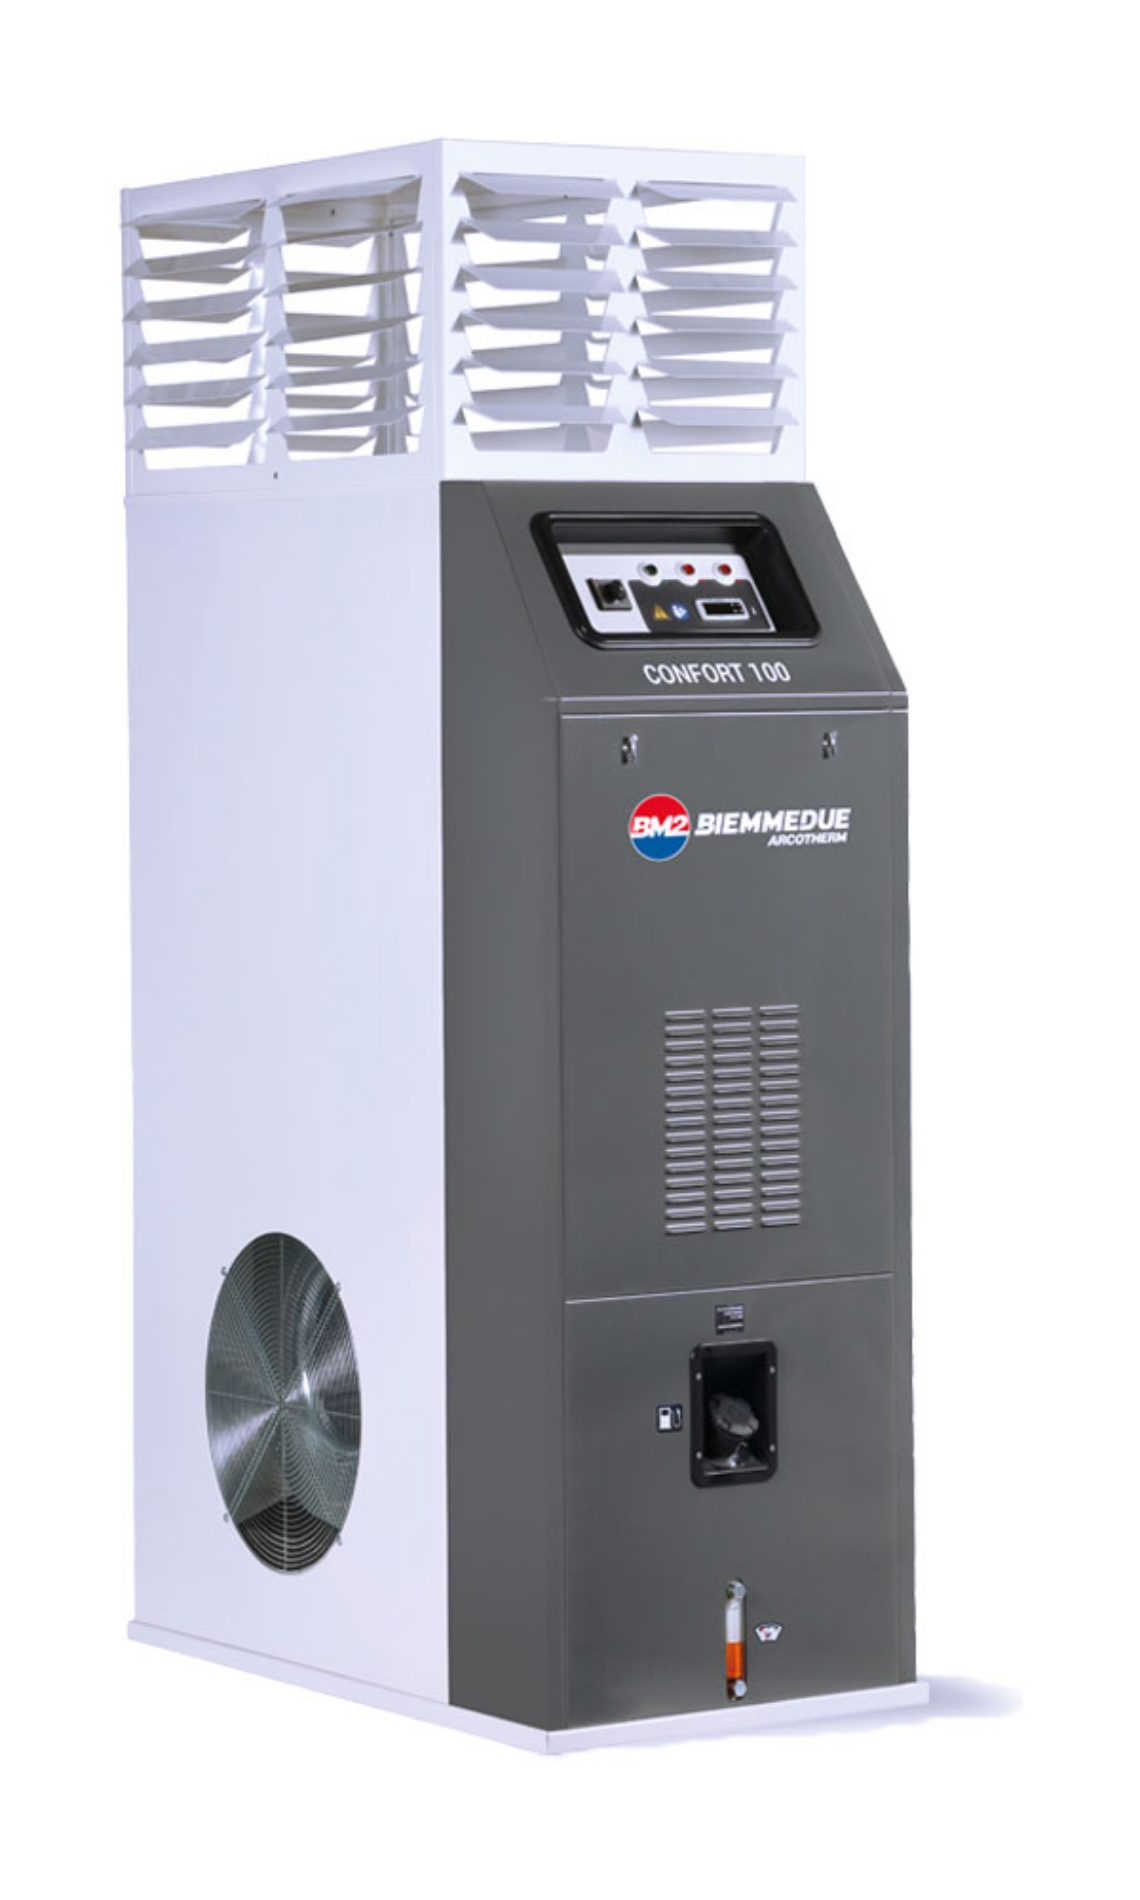 Picture of Arcotherm Confort 100 94kW Oil Cabinet Heater 